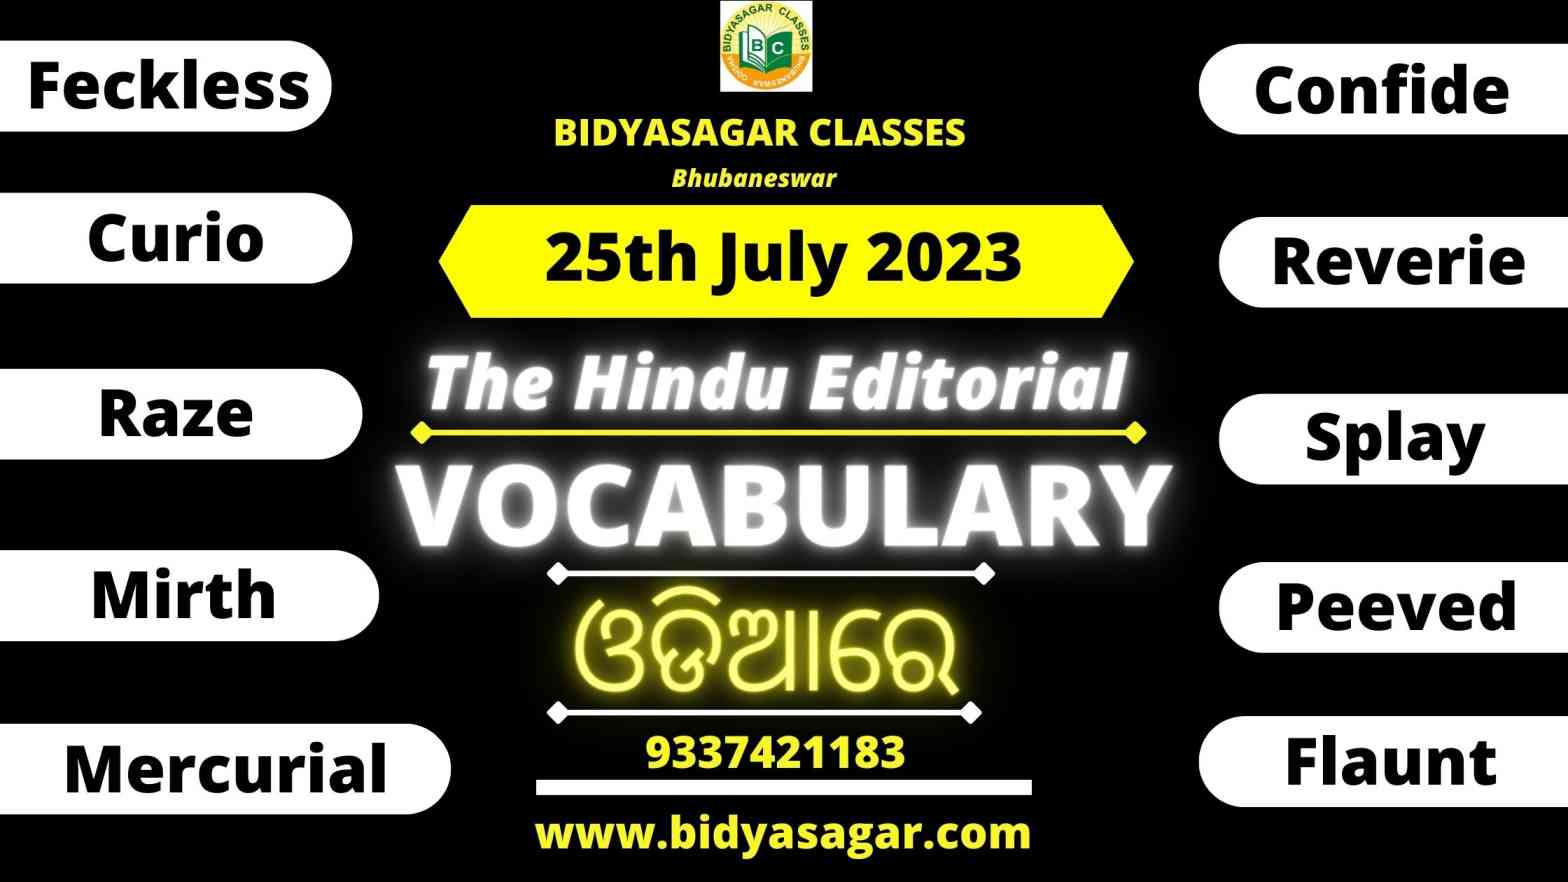 The Hindu Editorial Vocabulary of 25th July 2023